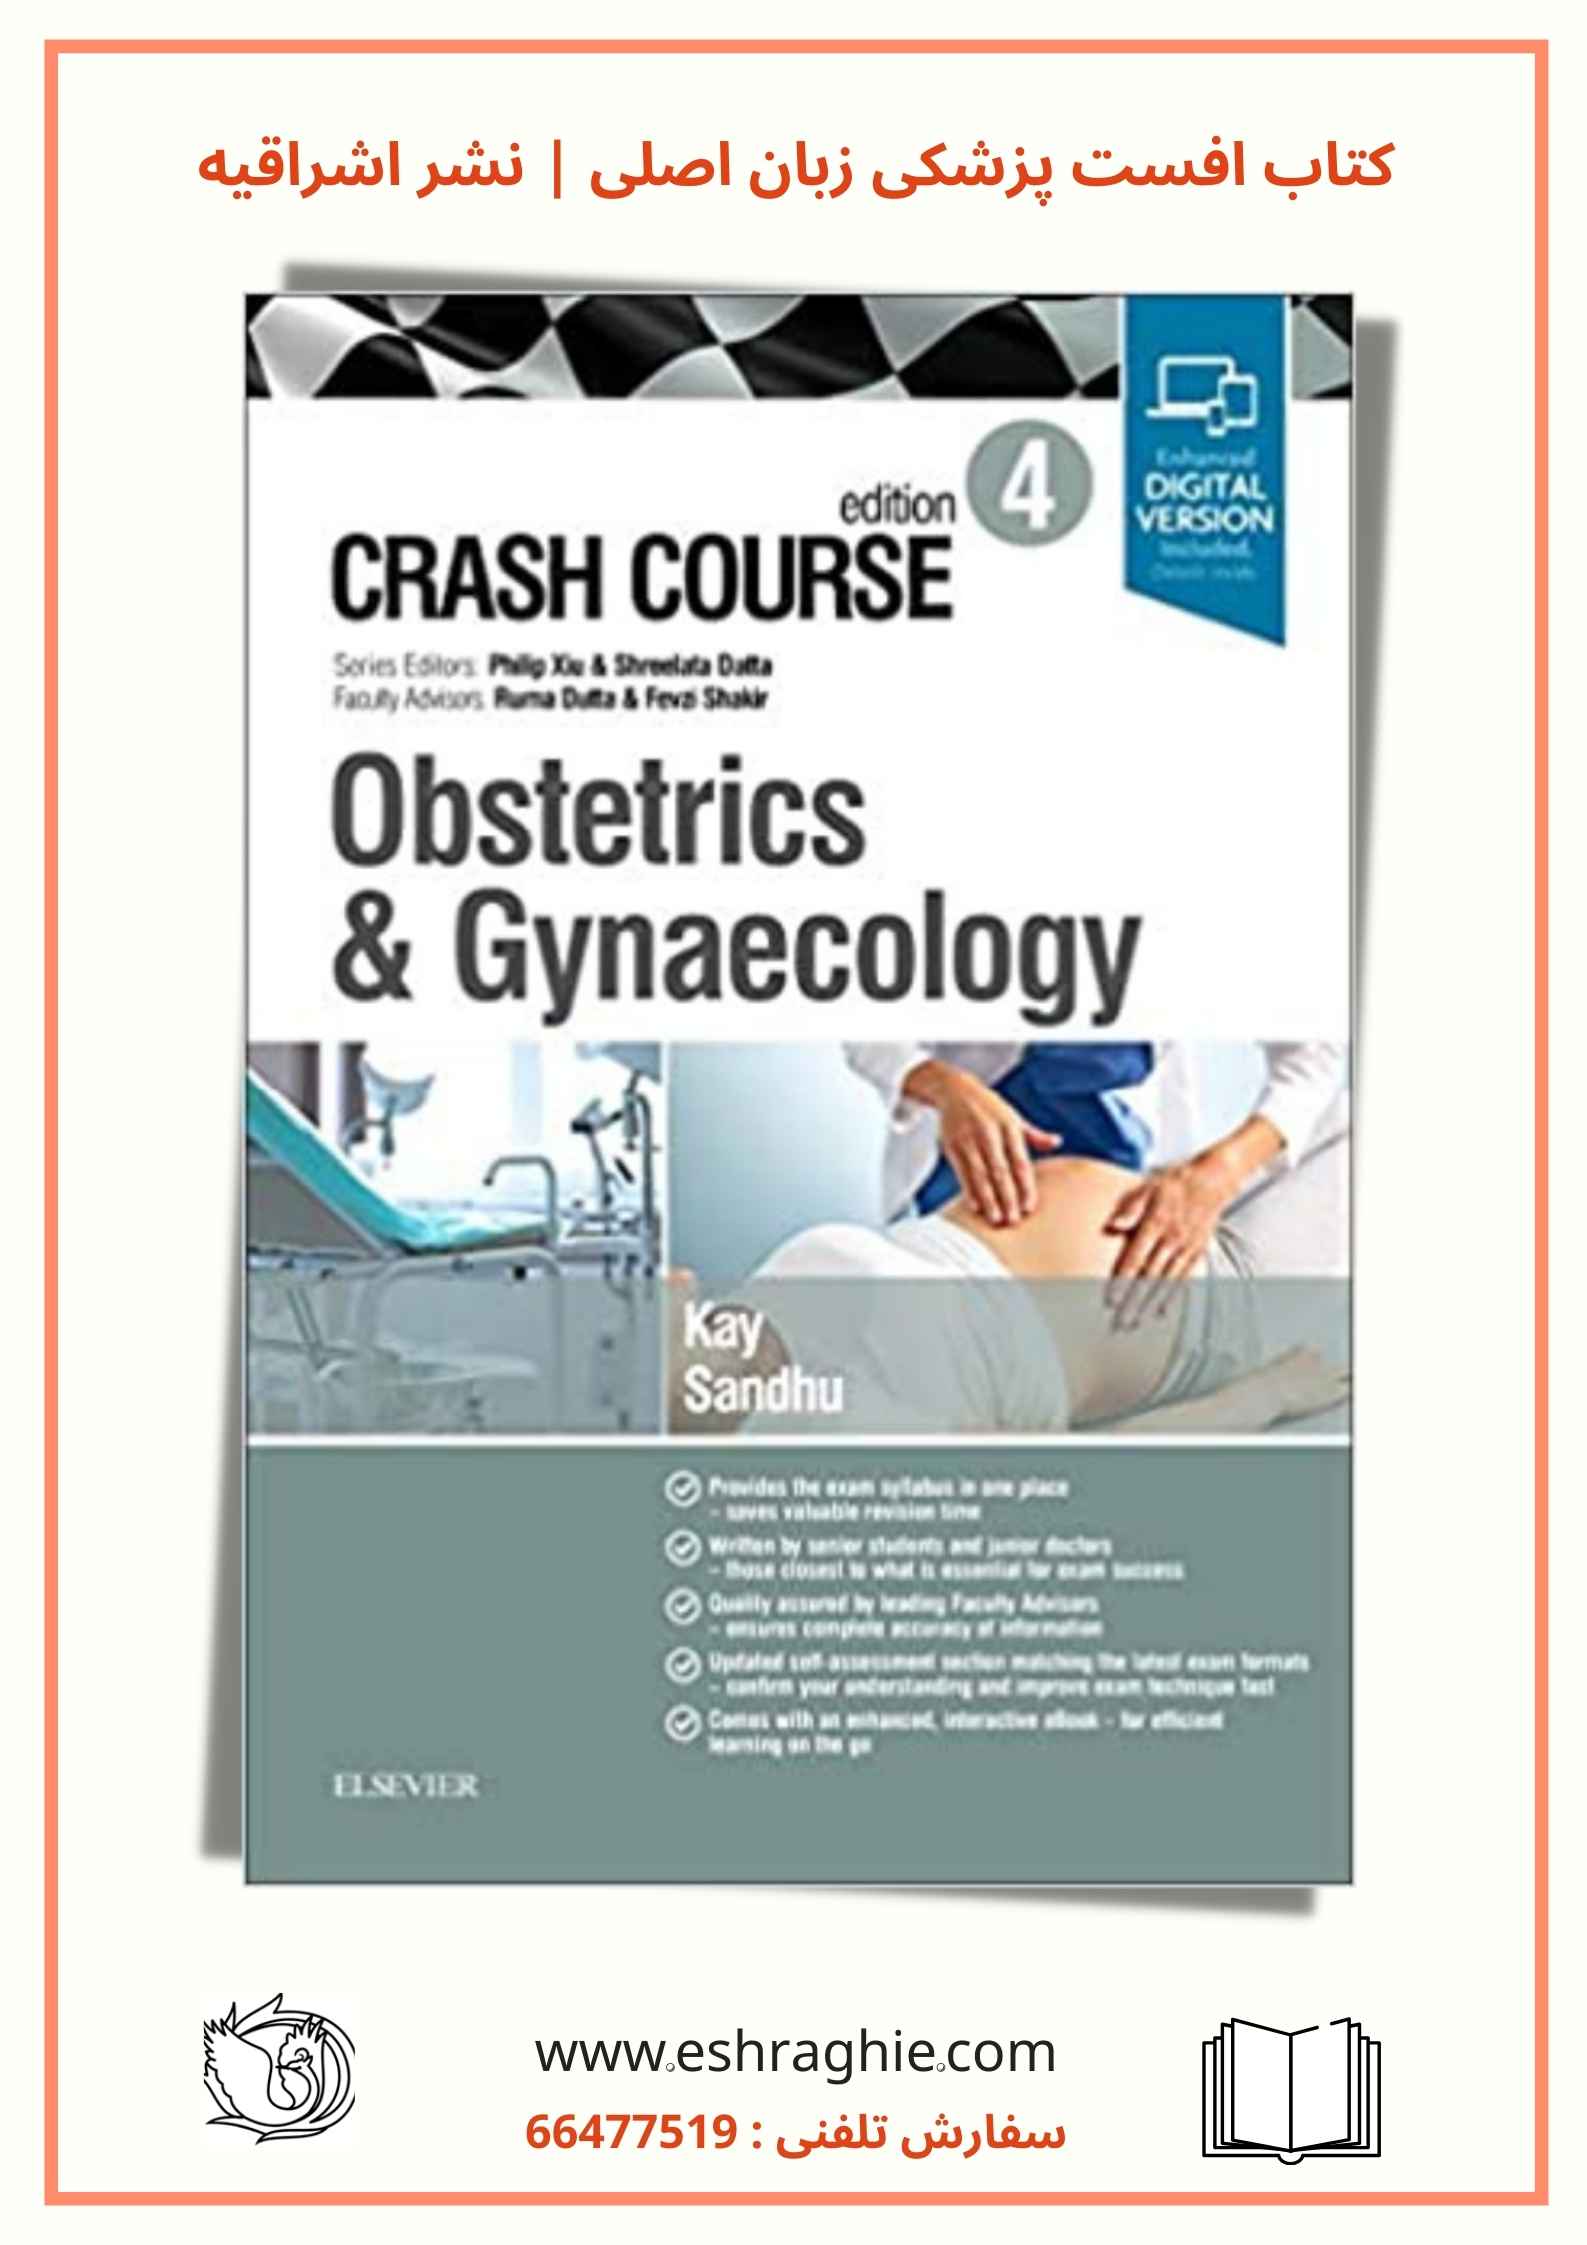 Crash Course Obstetrics and Gynaecology - 4th Edition 2019